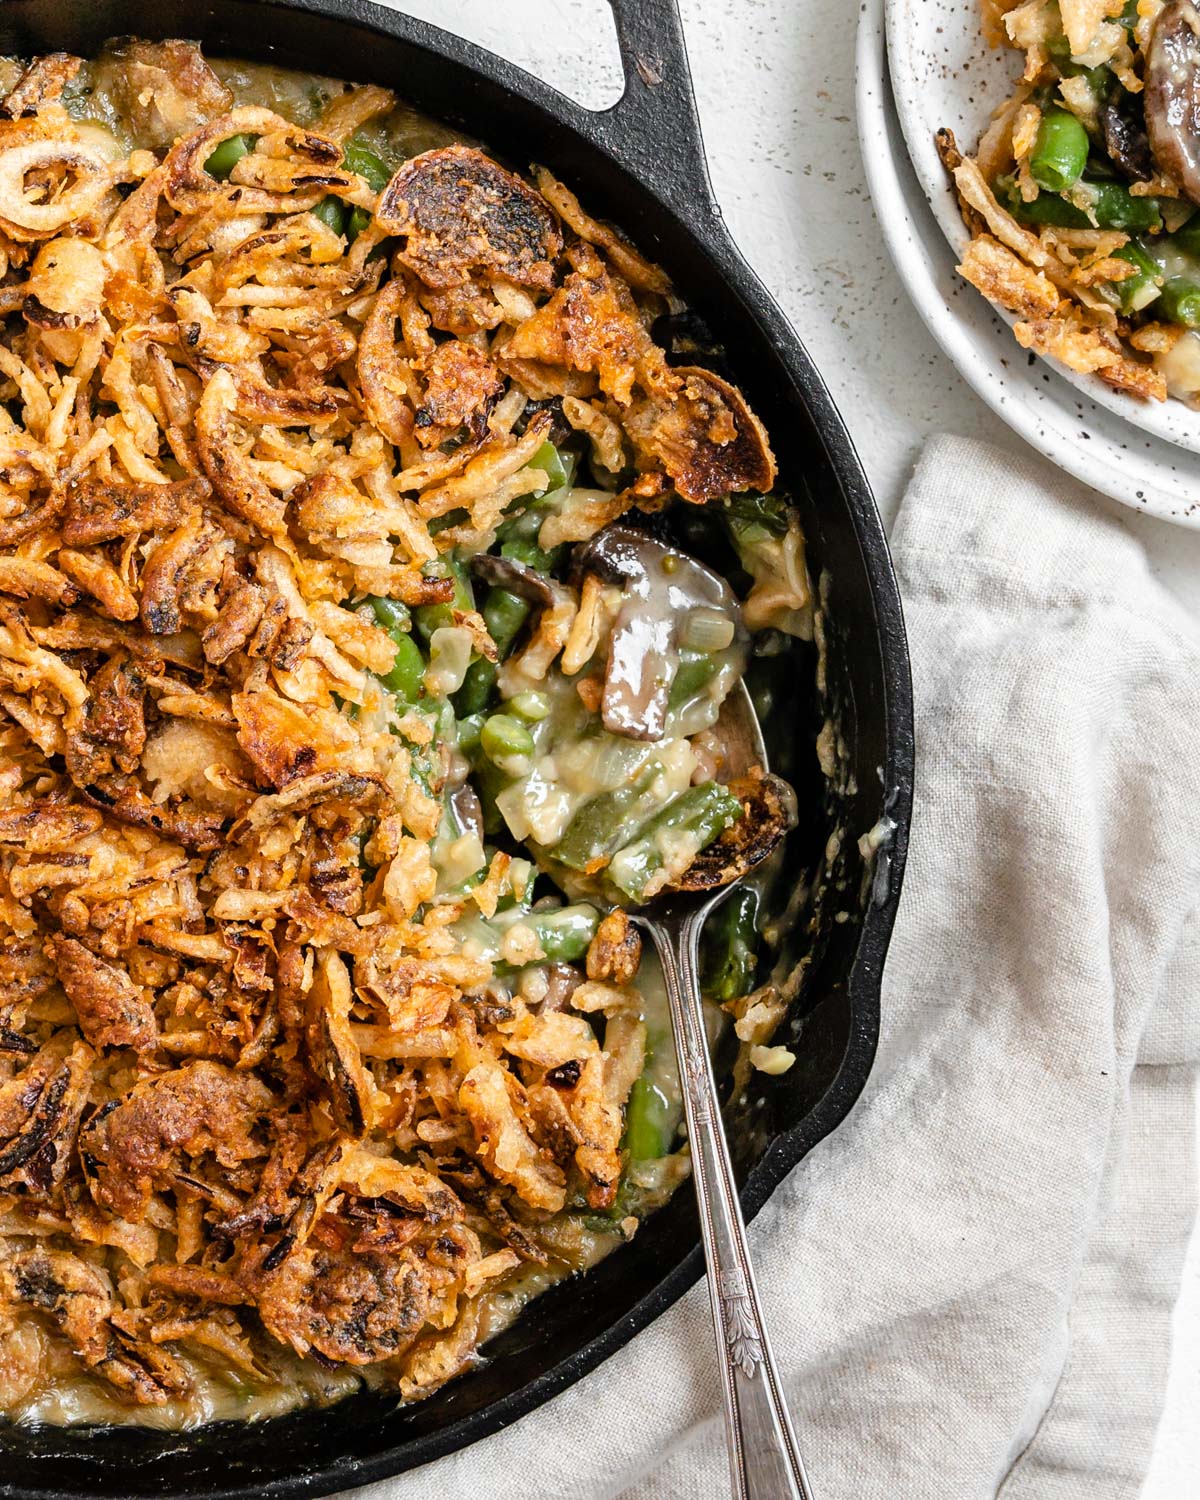 completed Dairy-Free Green Bean Casserole in a skillet with a portion plated on a white plate